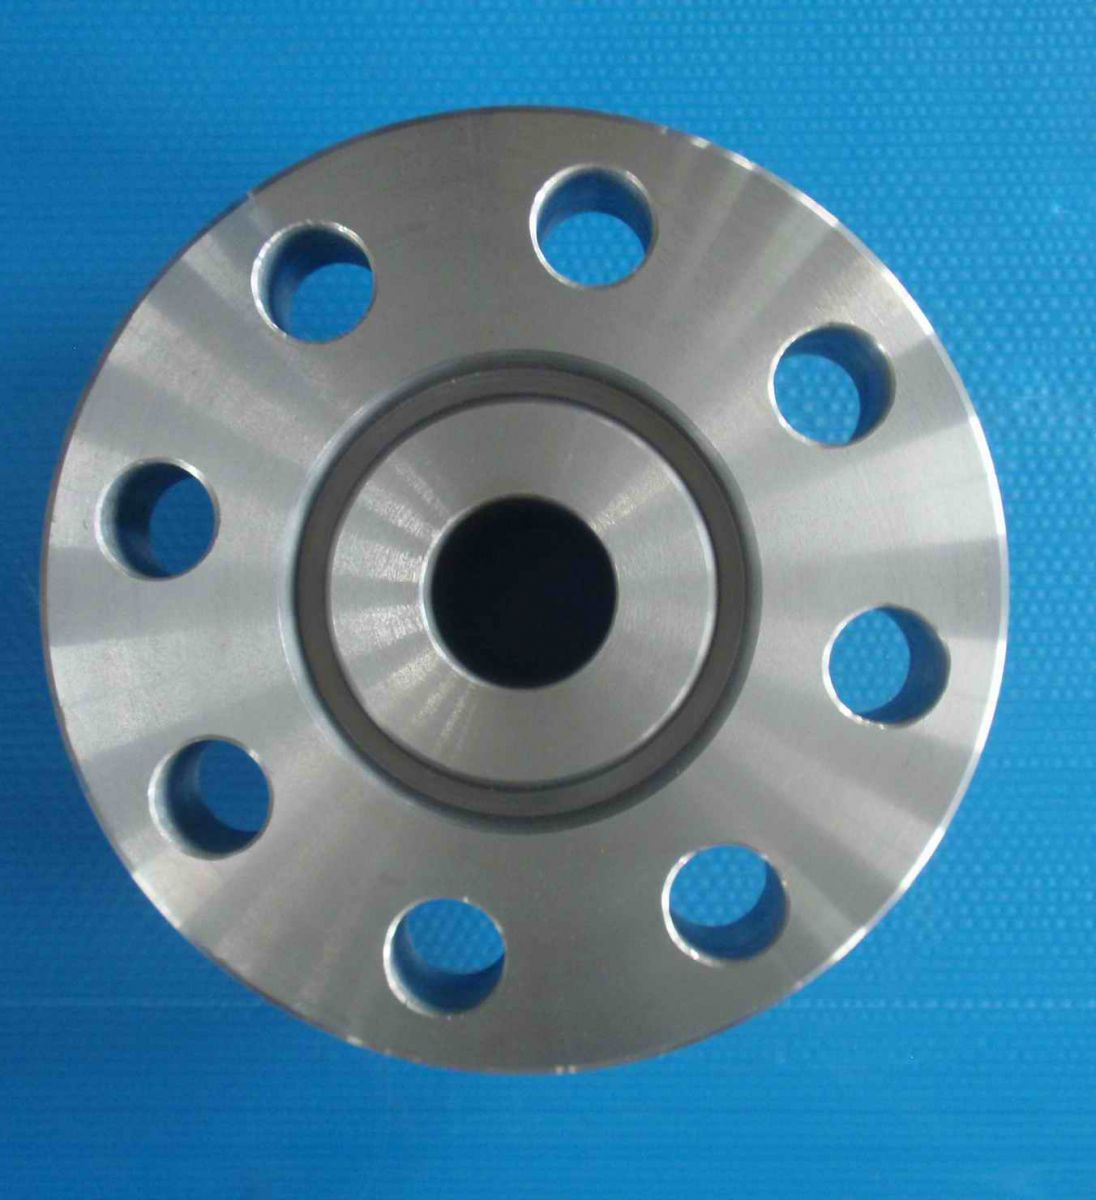 The Causes of Blowholes on Flange Castings and the Process Improvement Measures